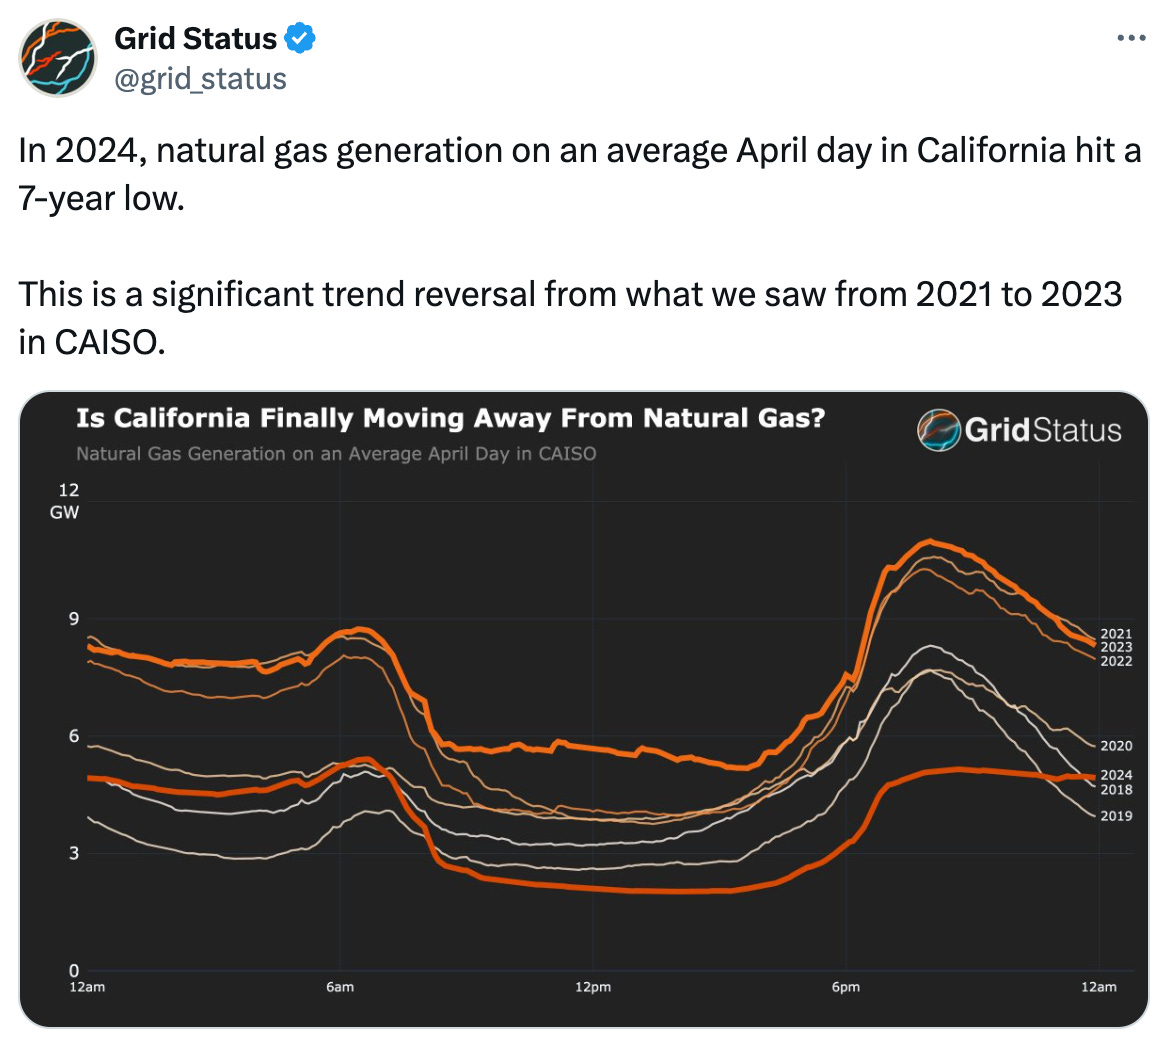  See new posts Conversation Grid Status @grid_status In 2024, natural gas generation on an average April day in California hit a 7-year low.  This is a significant trend reversal from what we saw from 2021 to 2023 in CAISO.